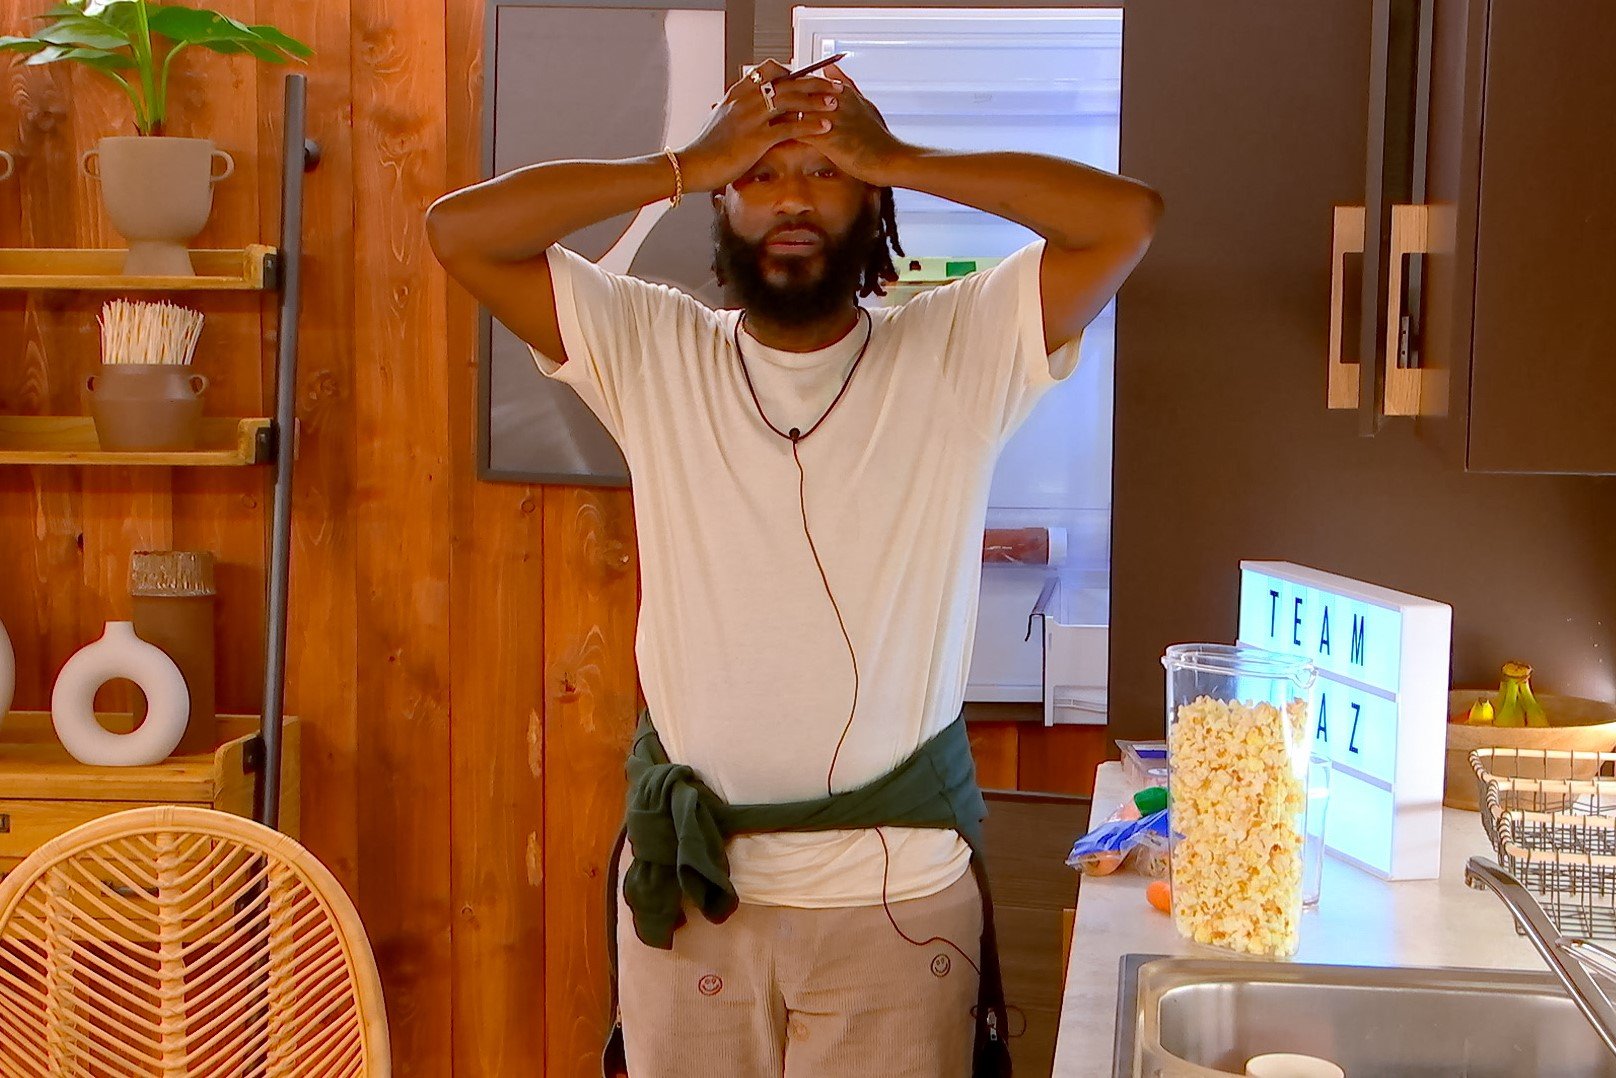 Chaz Lawery, who is one of the contestants in 'The Circle' Season 5 on Netflix, wears a white shirt, tan pants, and a dark green hoodie tied around his waist.